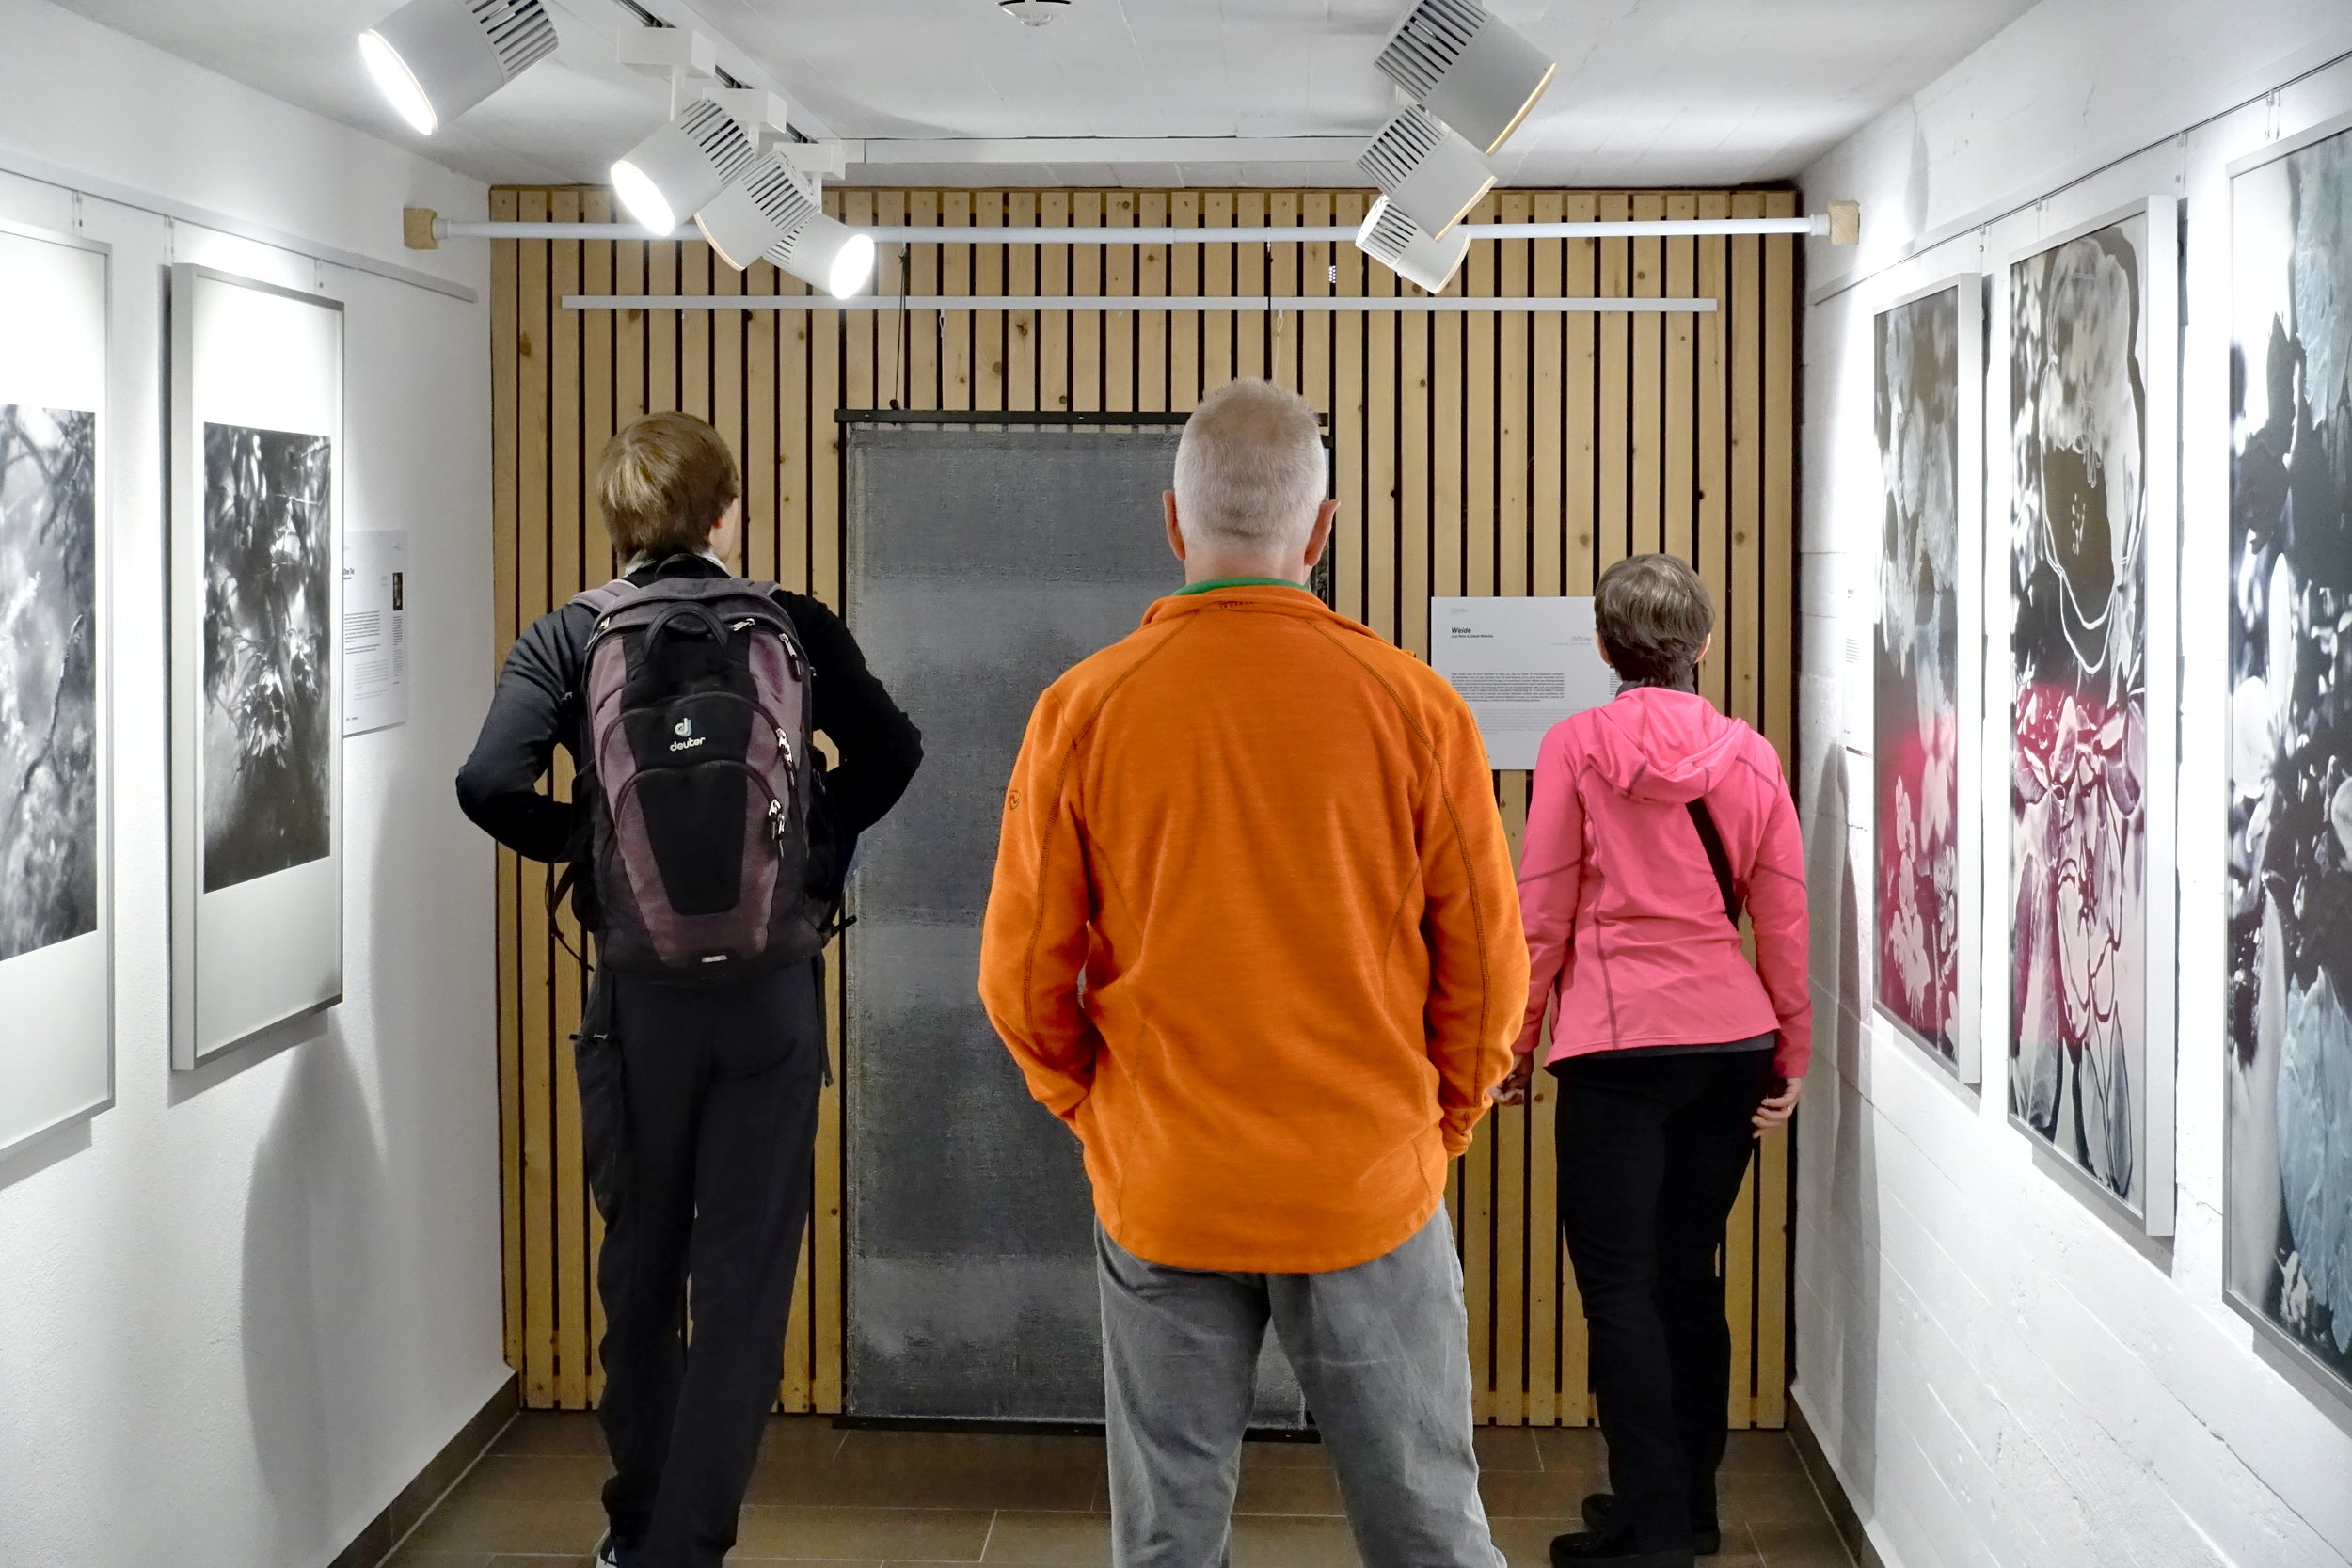 three visitors take in the artwork. we see their backs - one black-clad svelte silhouette, an elderly couple in vibrant sweaters, him orange, her pink.